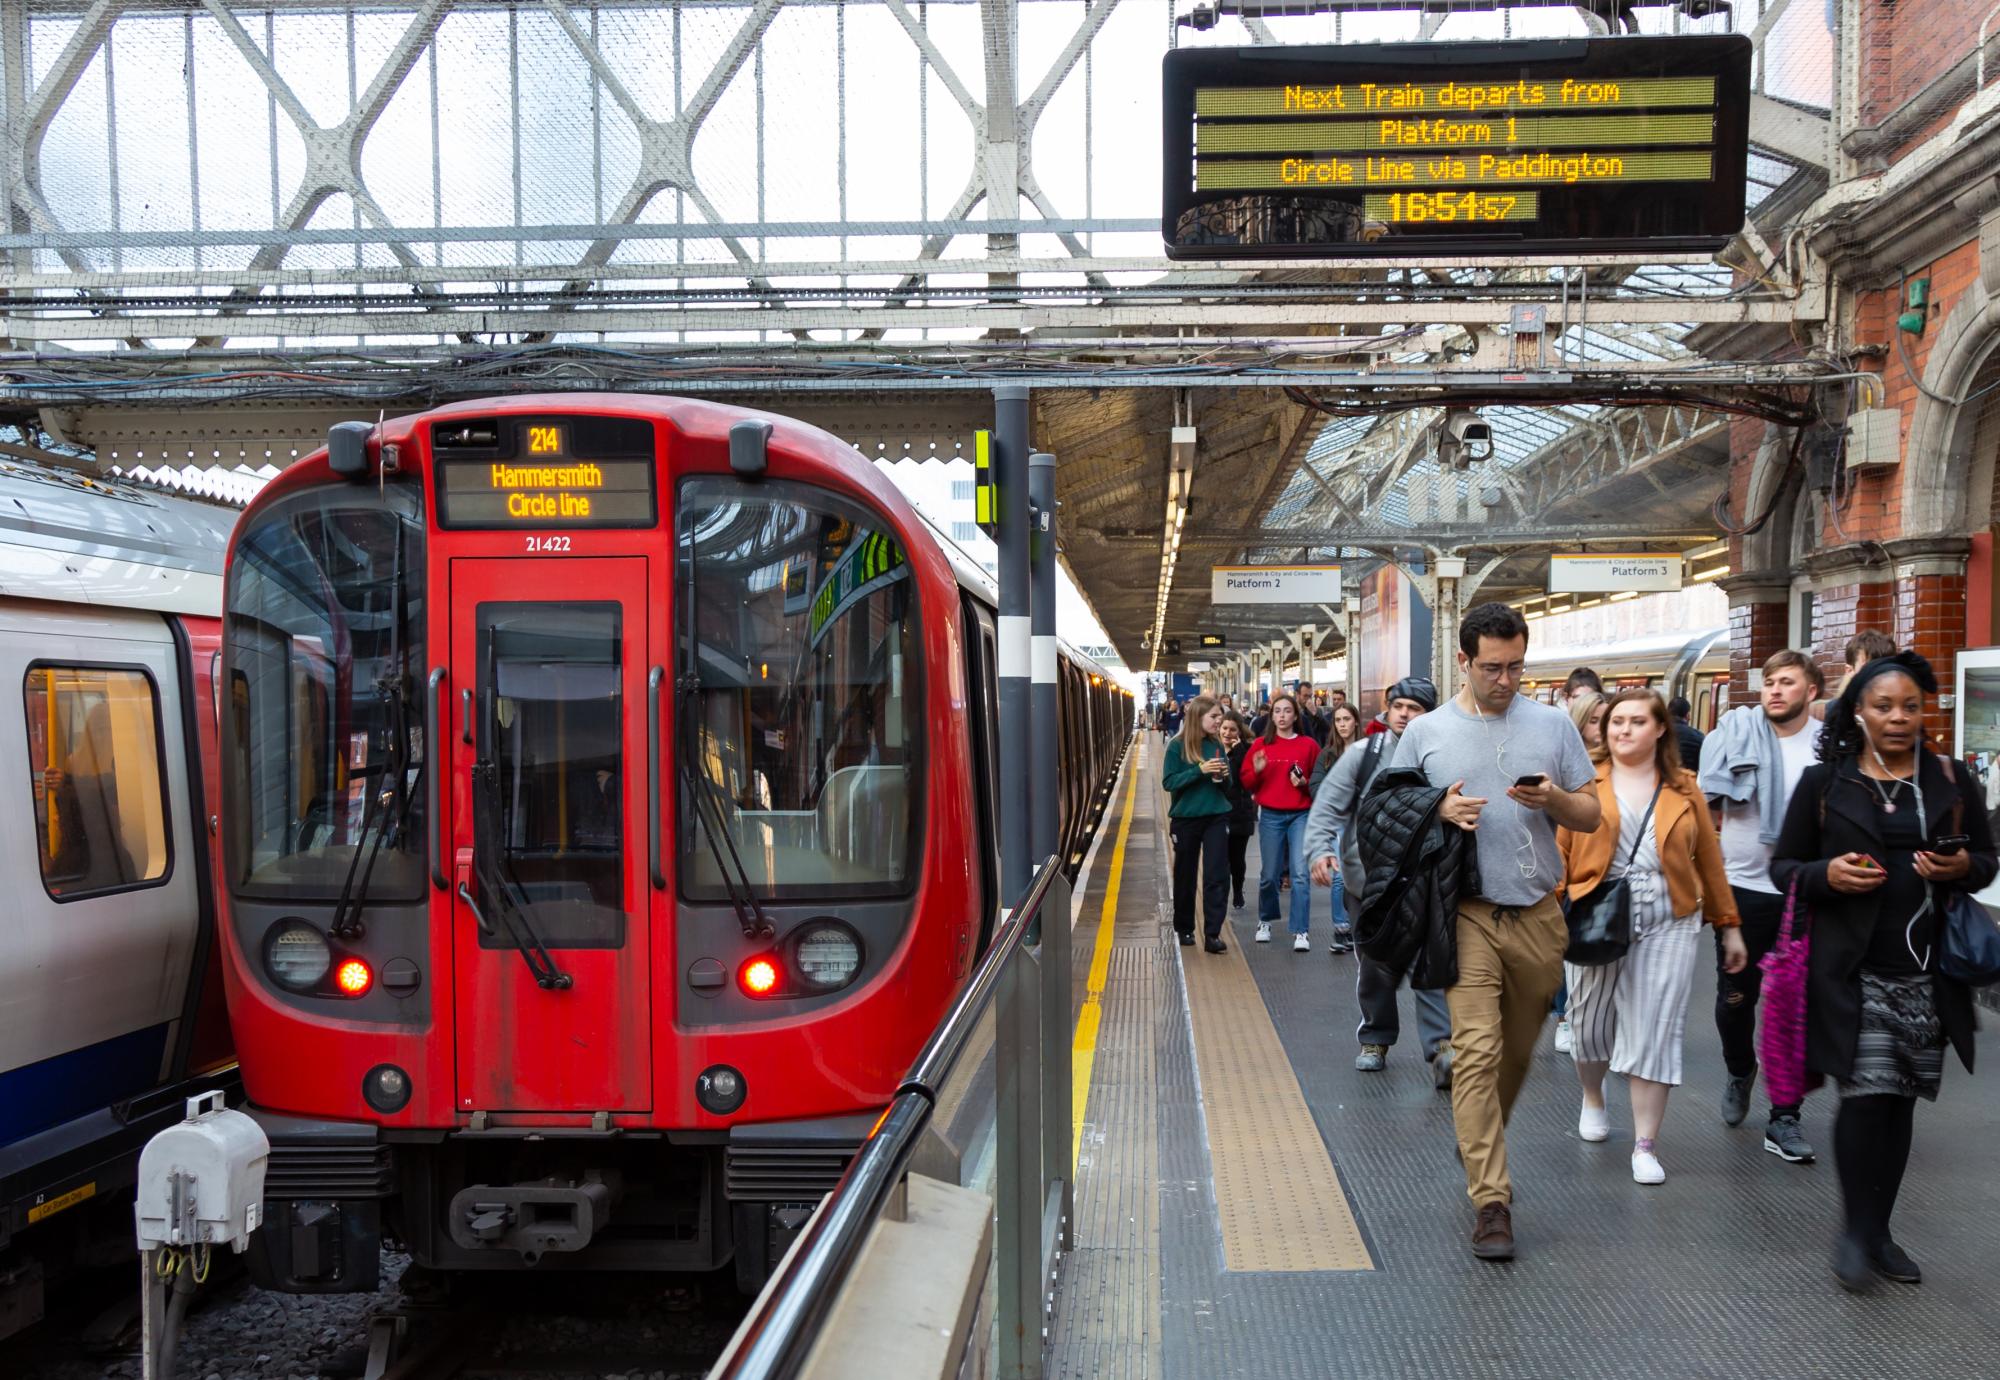 Calls for investment clarity as Tube ridership hits pre-pandemic levels 